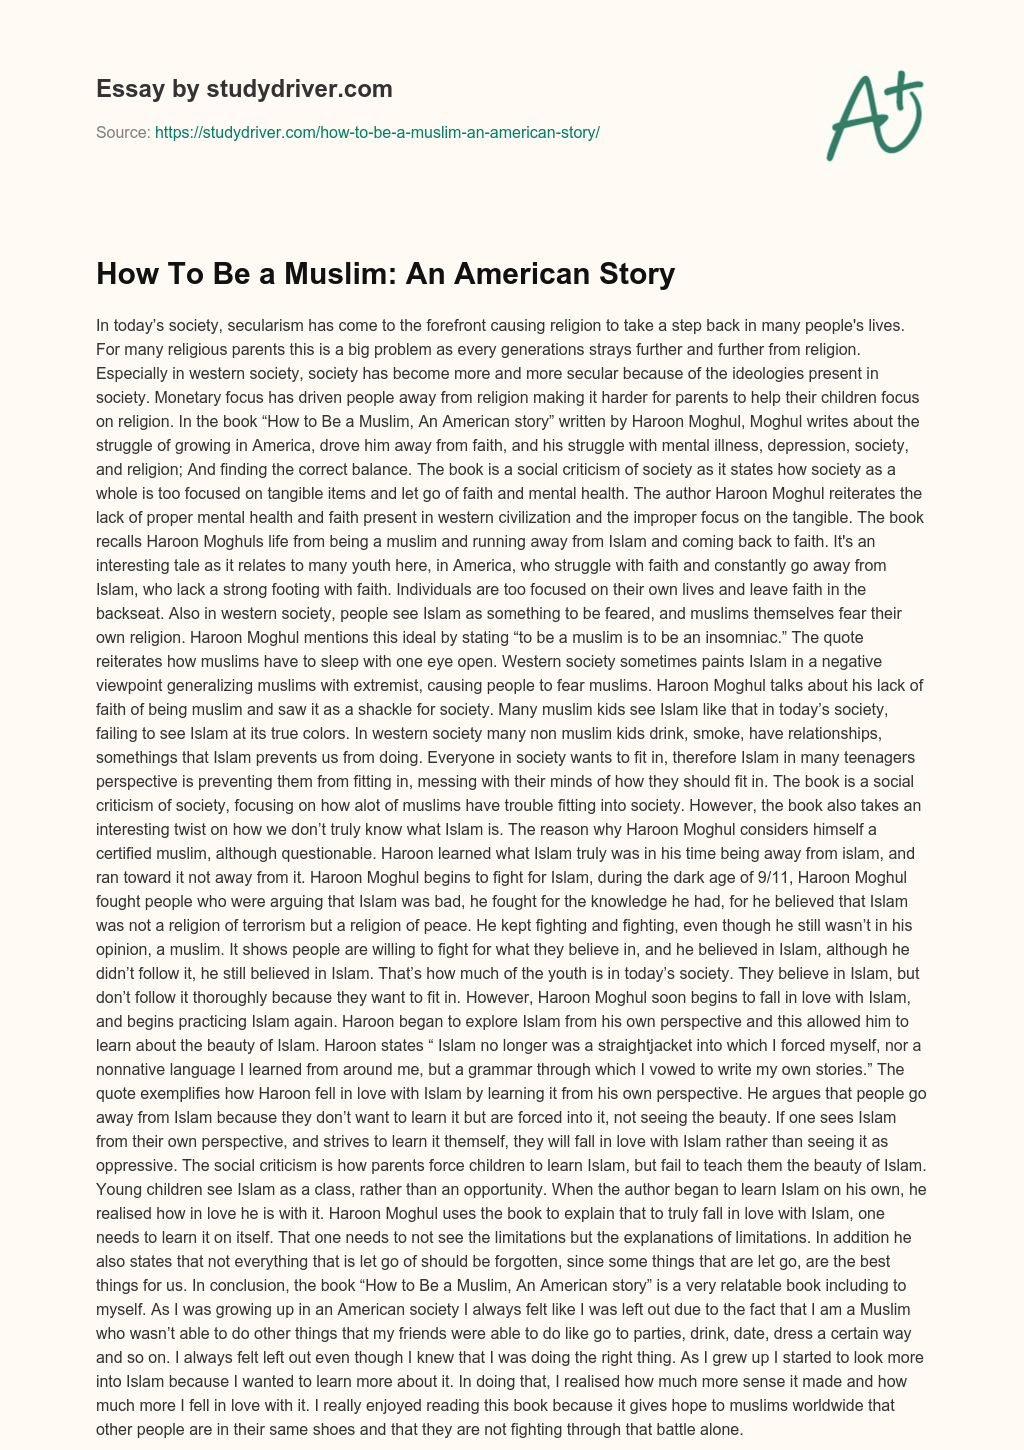 How to be a Muslim: an American Story essay